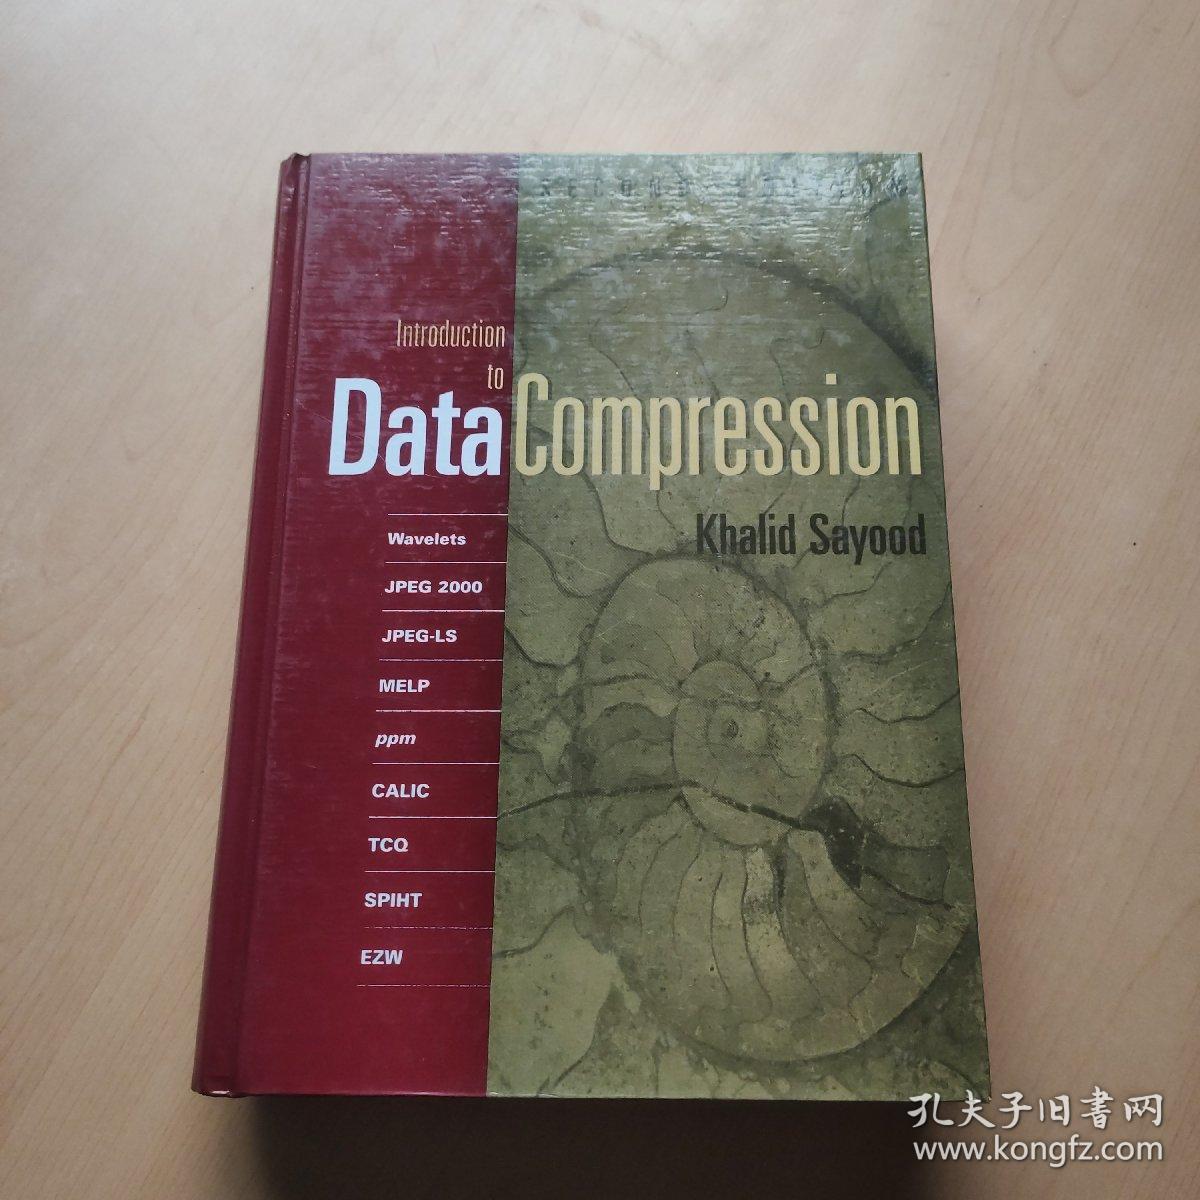 Introduction to Data Compression, Second Edition (The Morgan Kaufmann Series in Multimedia Information and Systems)